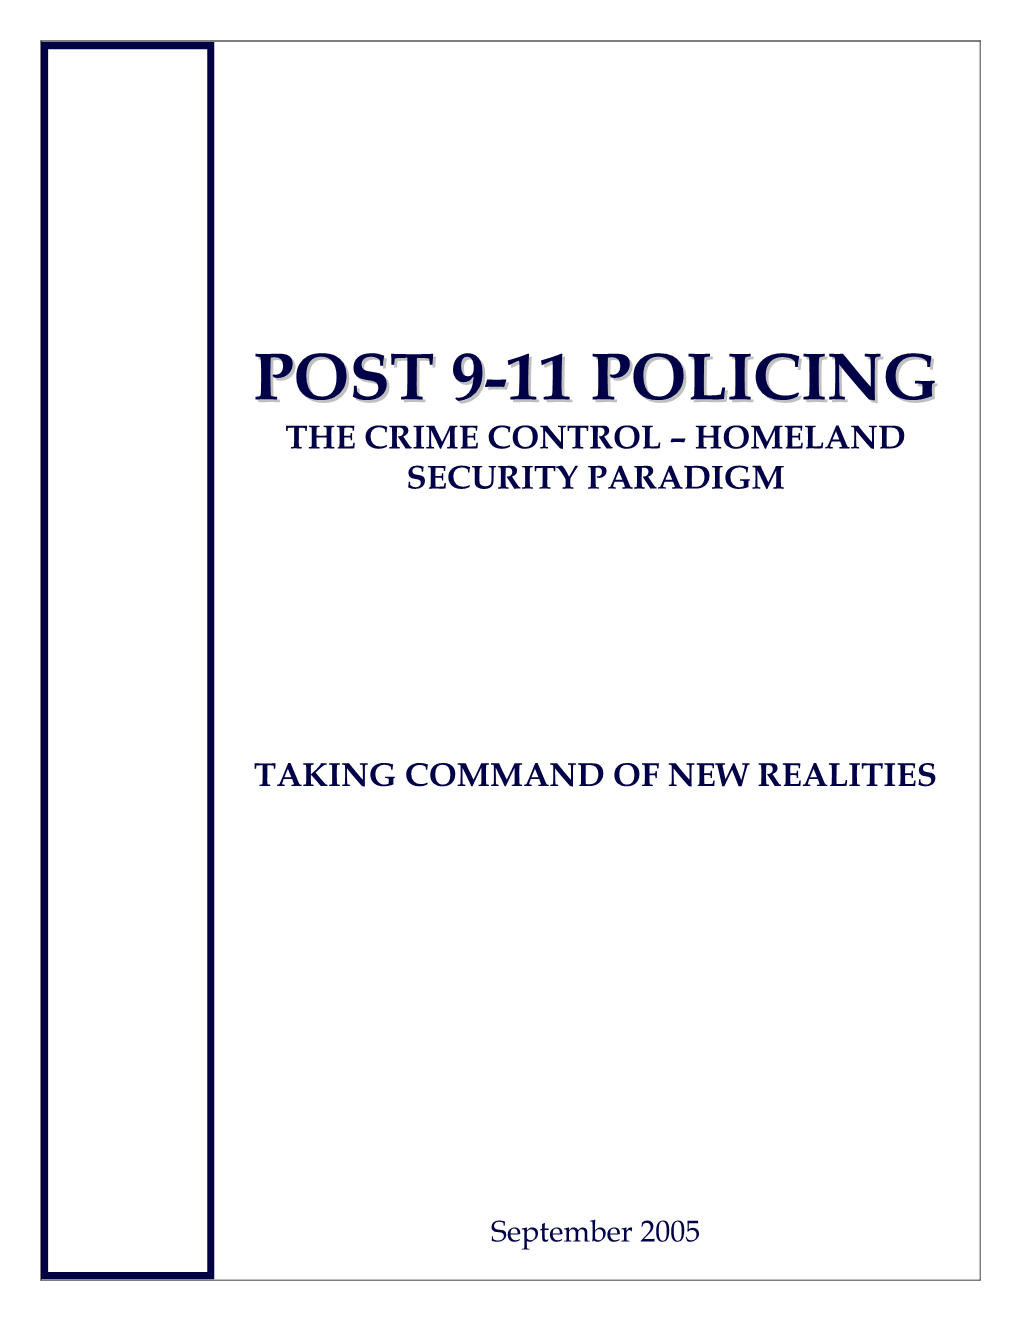 Post 9-11 Policing Project